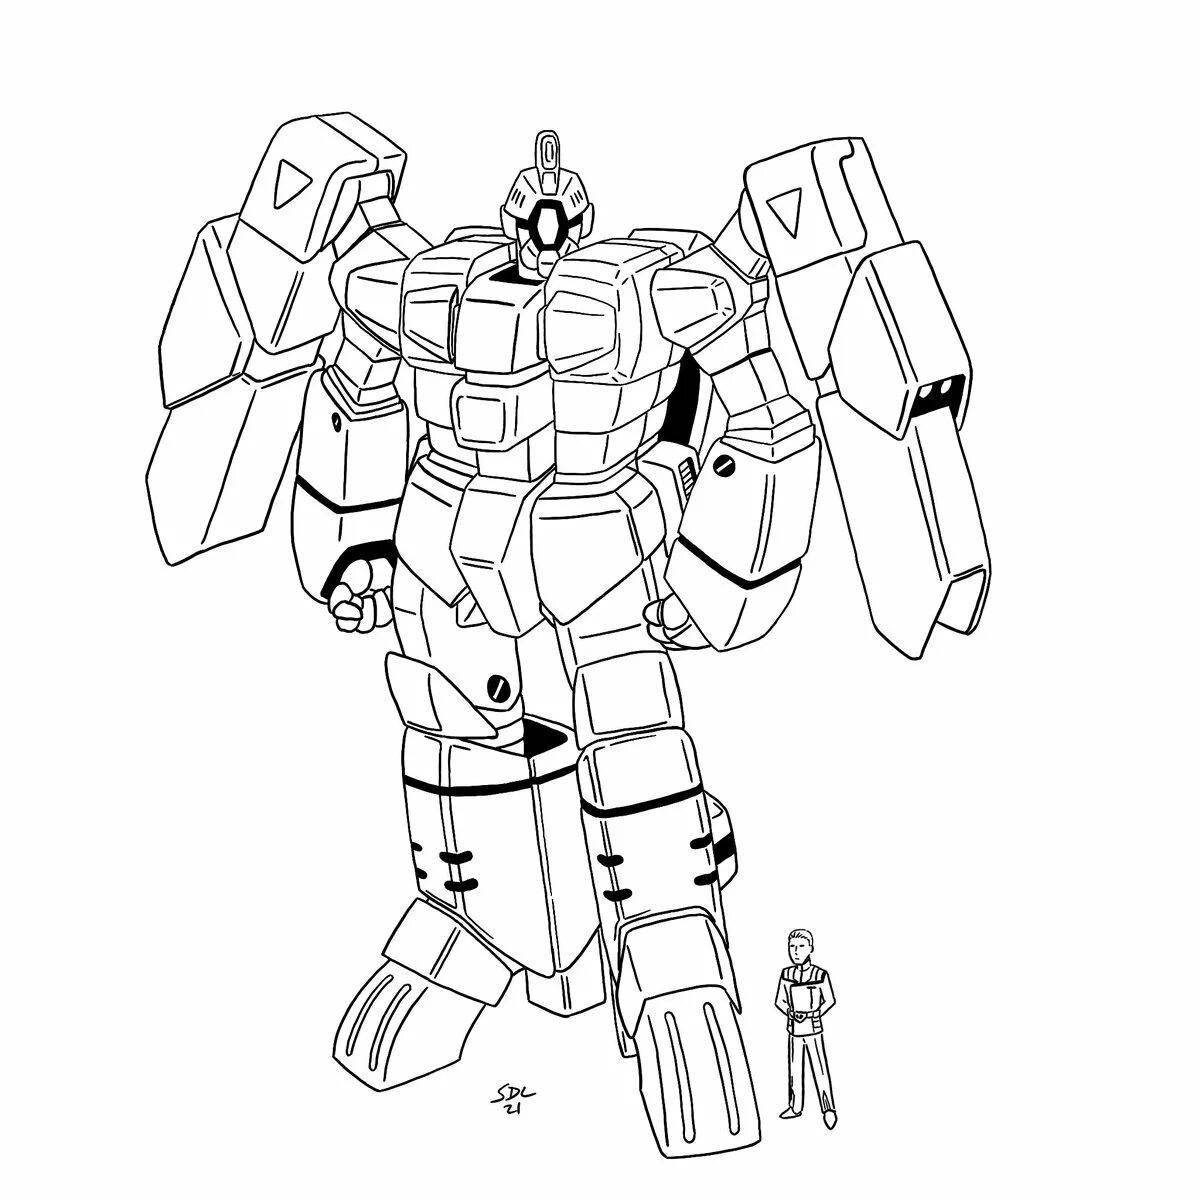 Tobot t playful coloring page